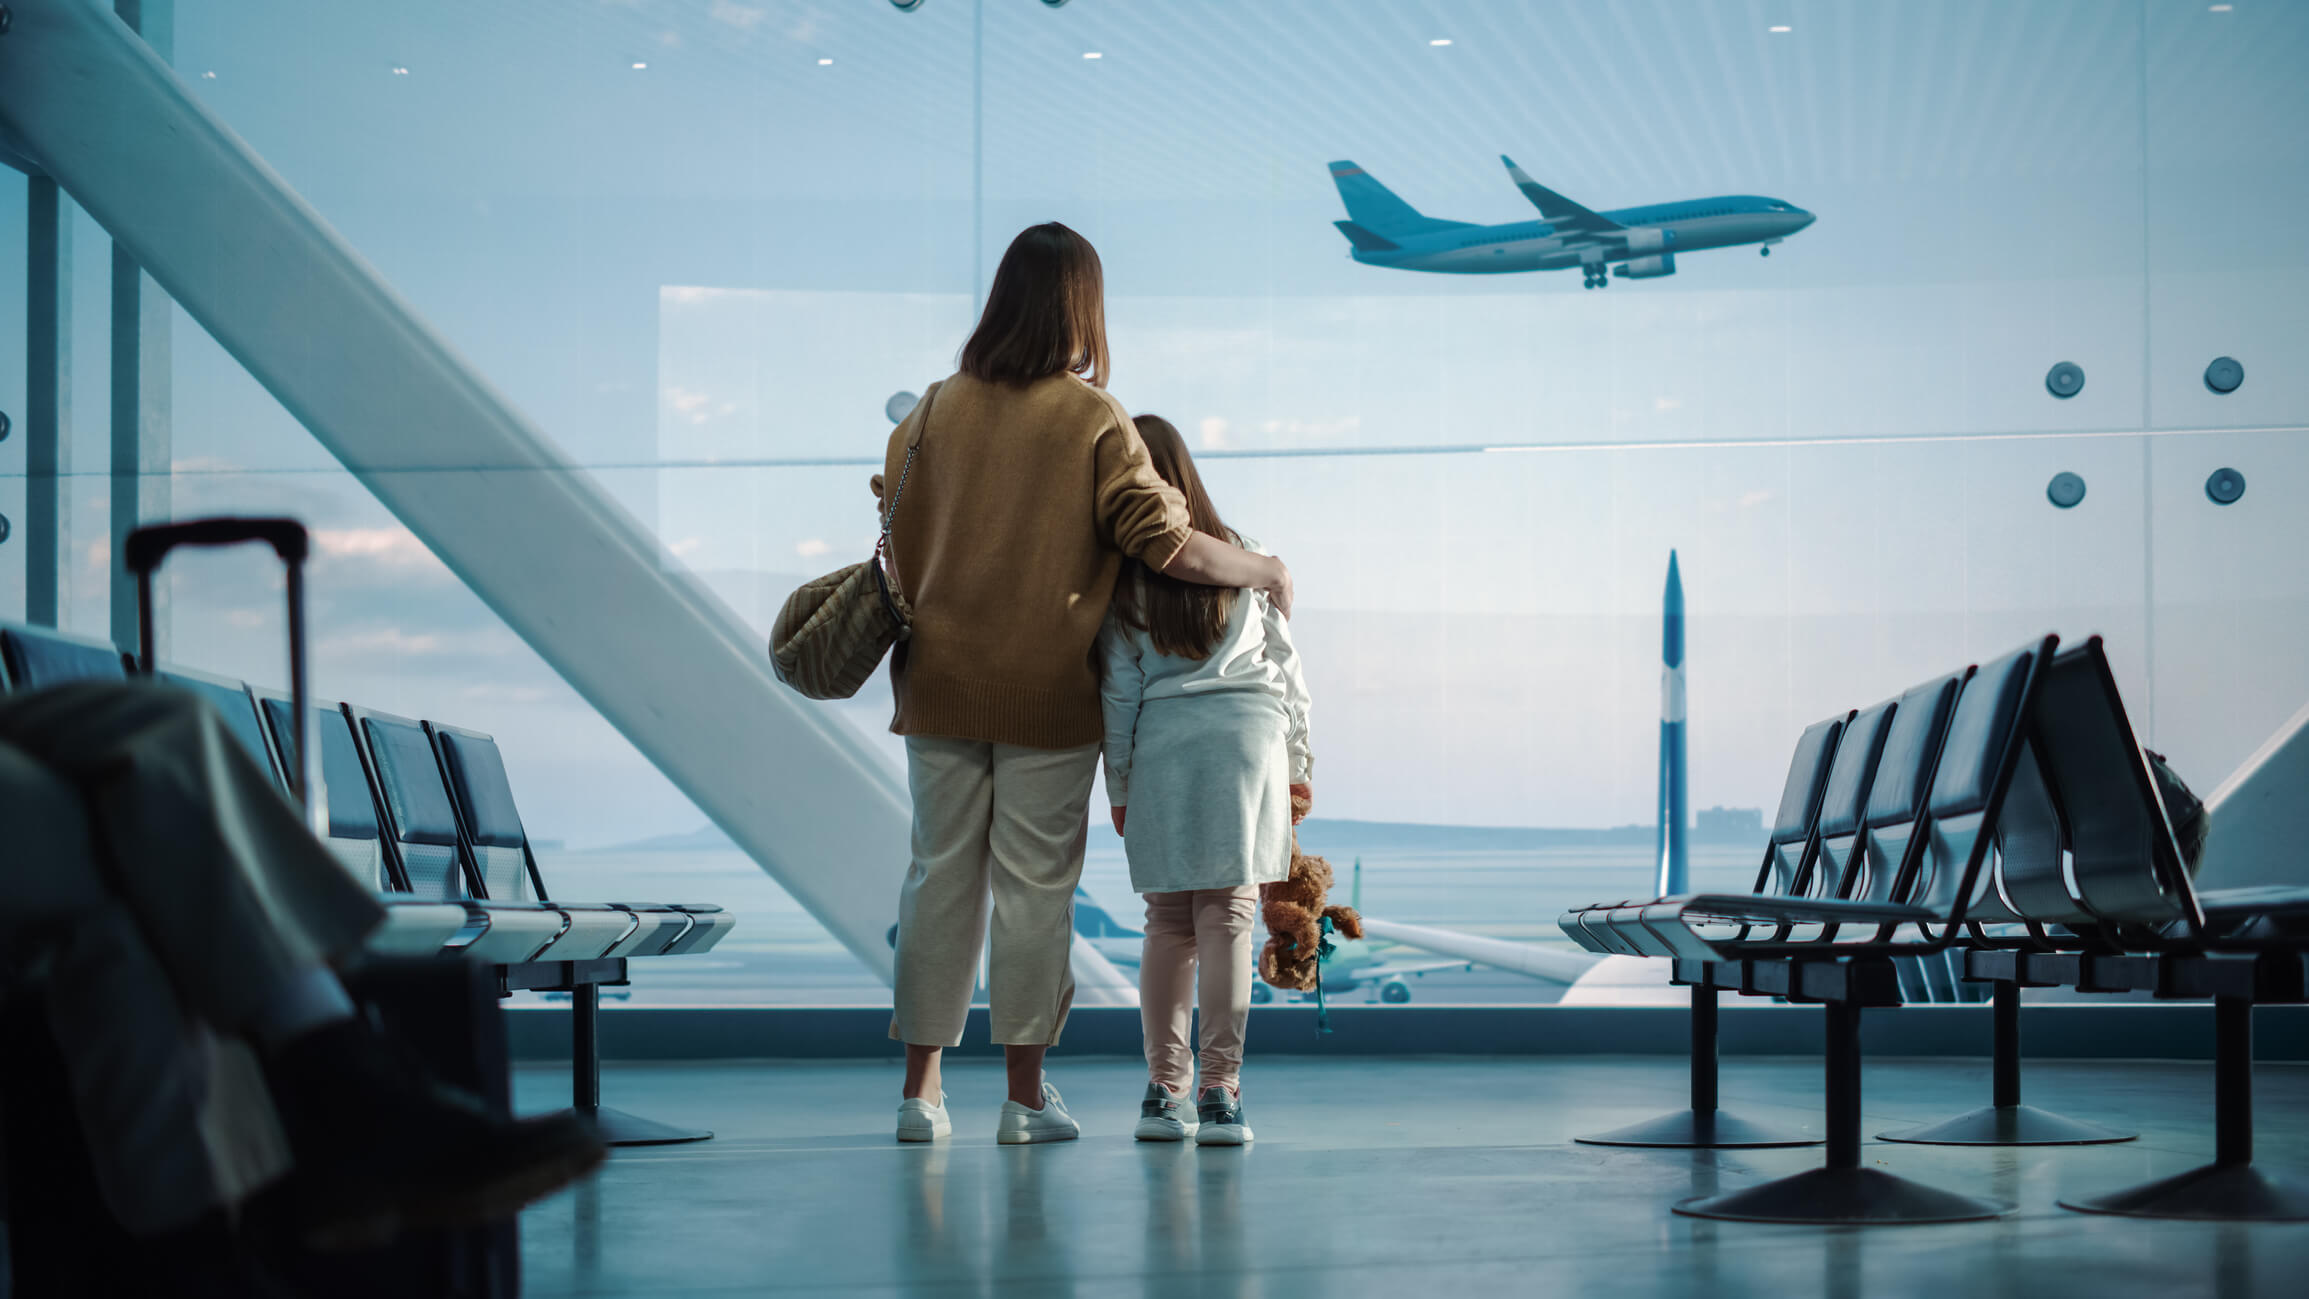 ensuring safety and security in air travel